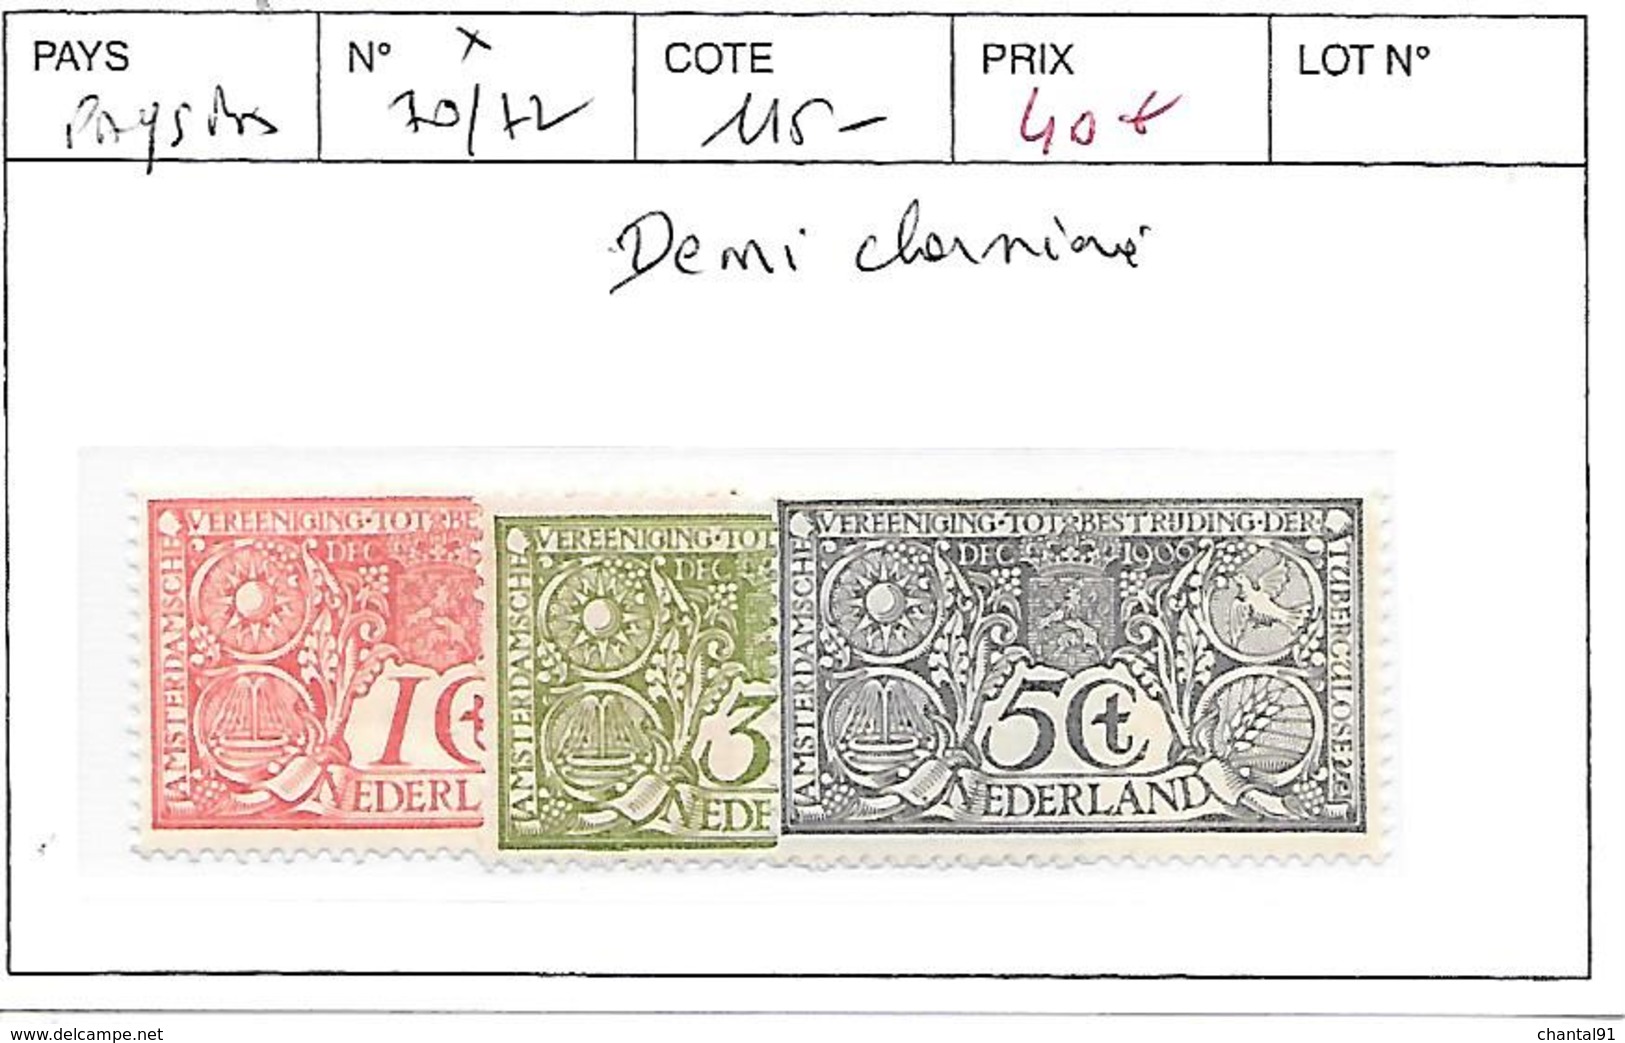 PAYS BAS N° 70/72 * DEMI CHARNIERE - Unused Stamps